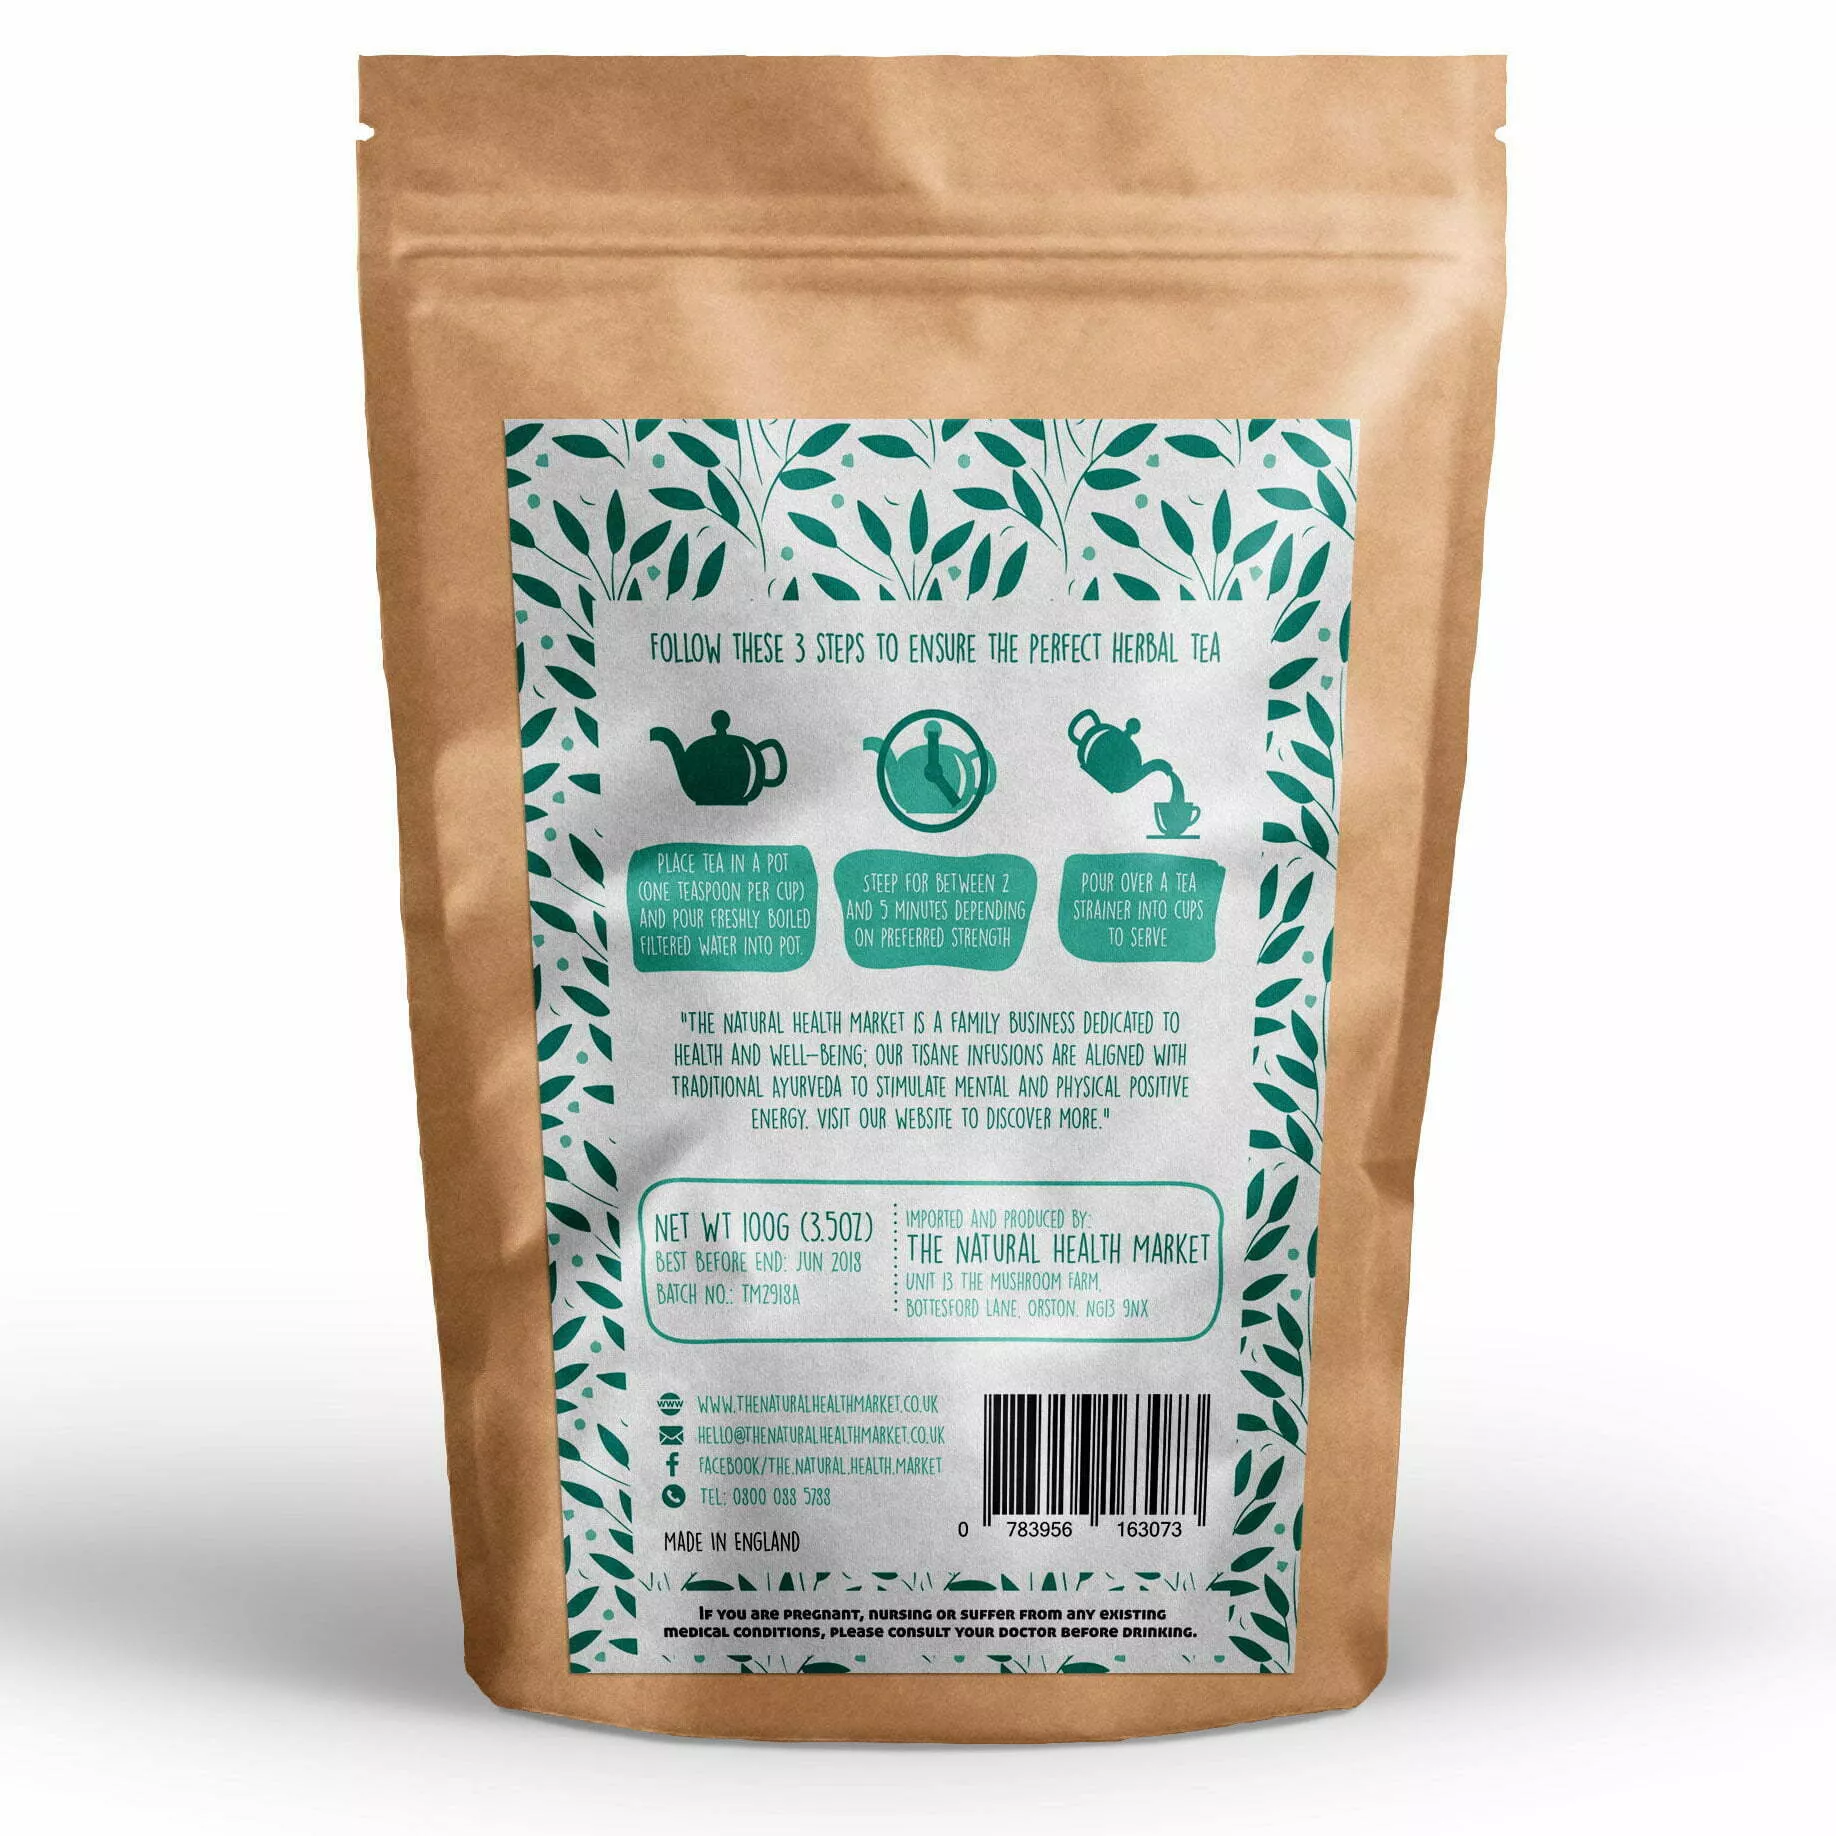 Peppermint tea - Loose Leaf Herbal Tea by The Natural Health Market. 100g pack.